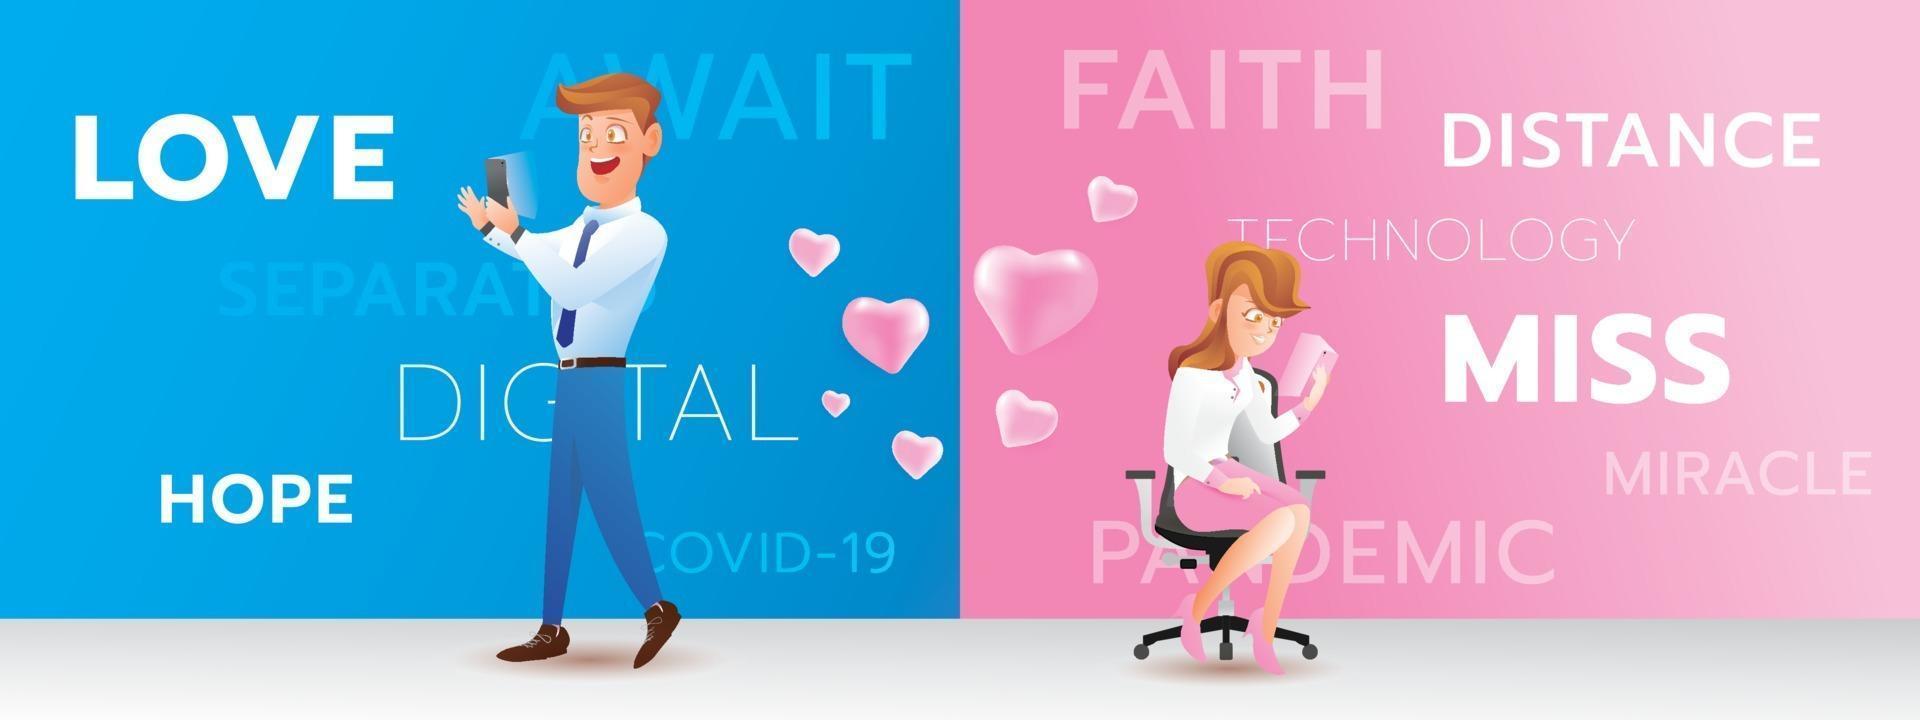 Couple cartoon contact with love emotion, digital technology can help people concept vector